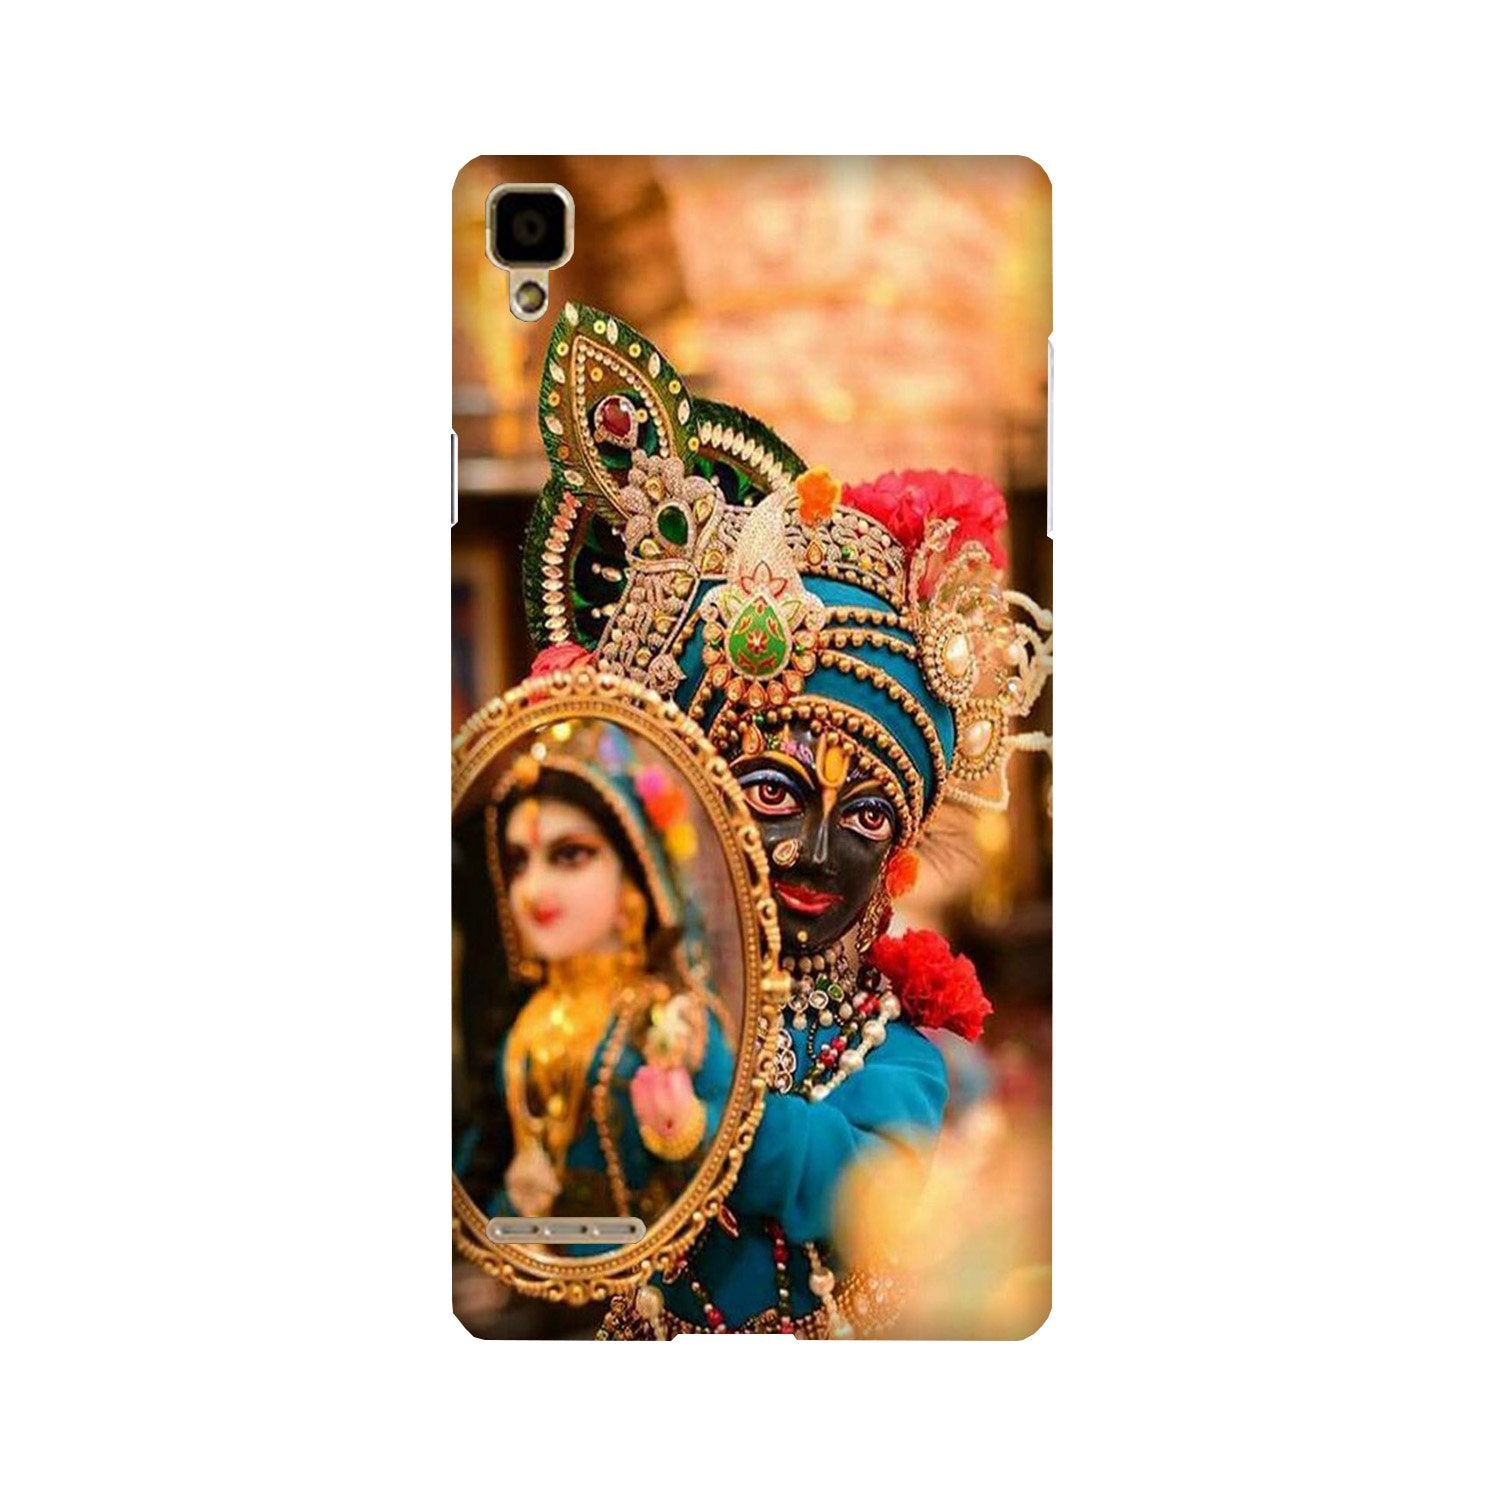 Lord Krishna5 Case for Oppo F1